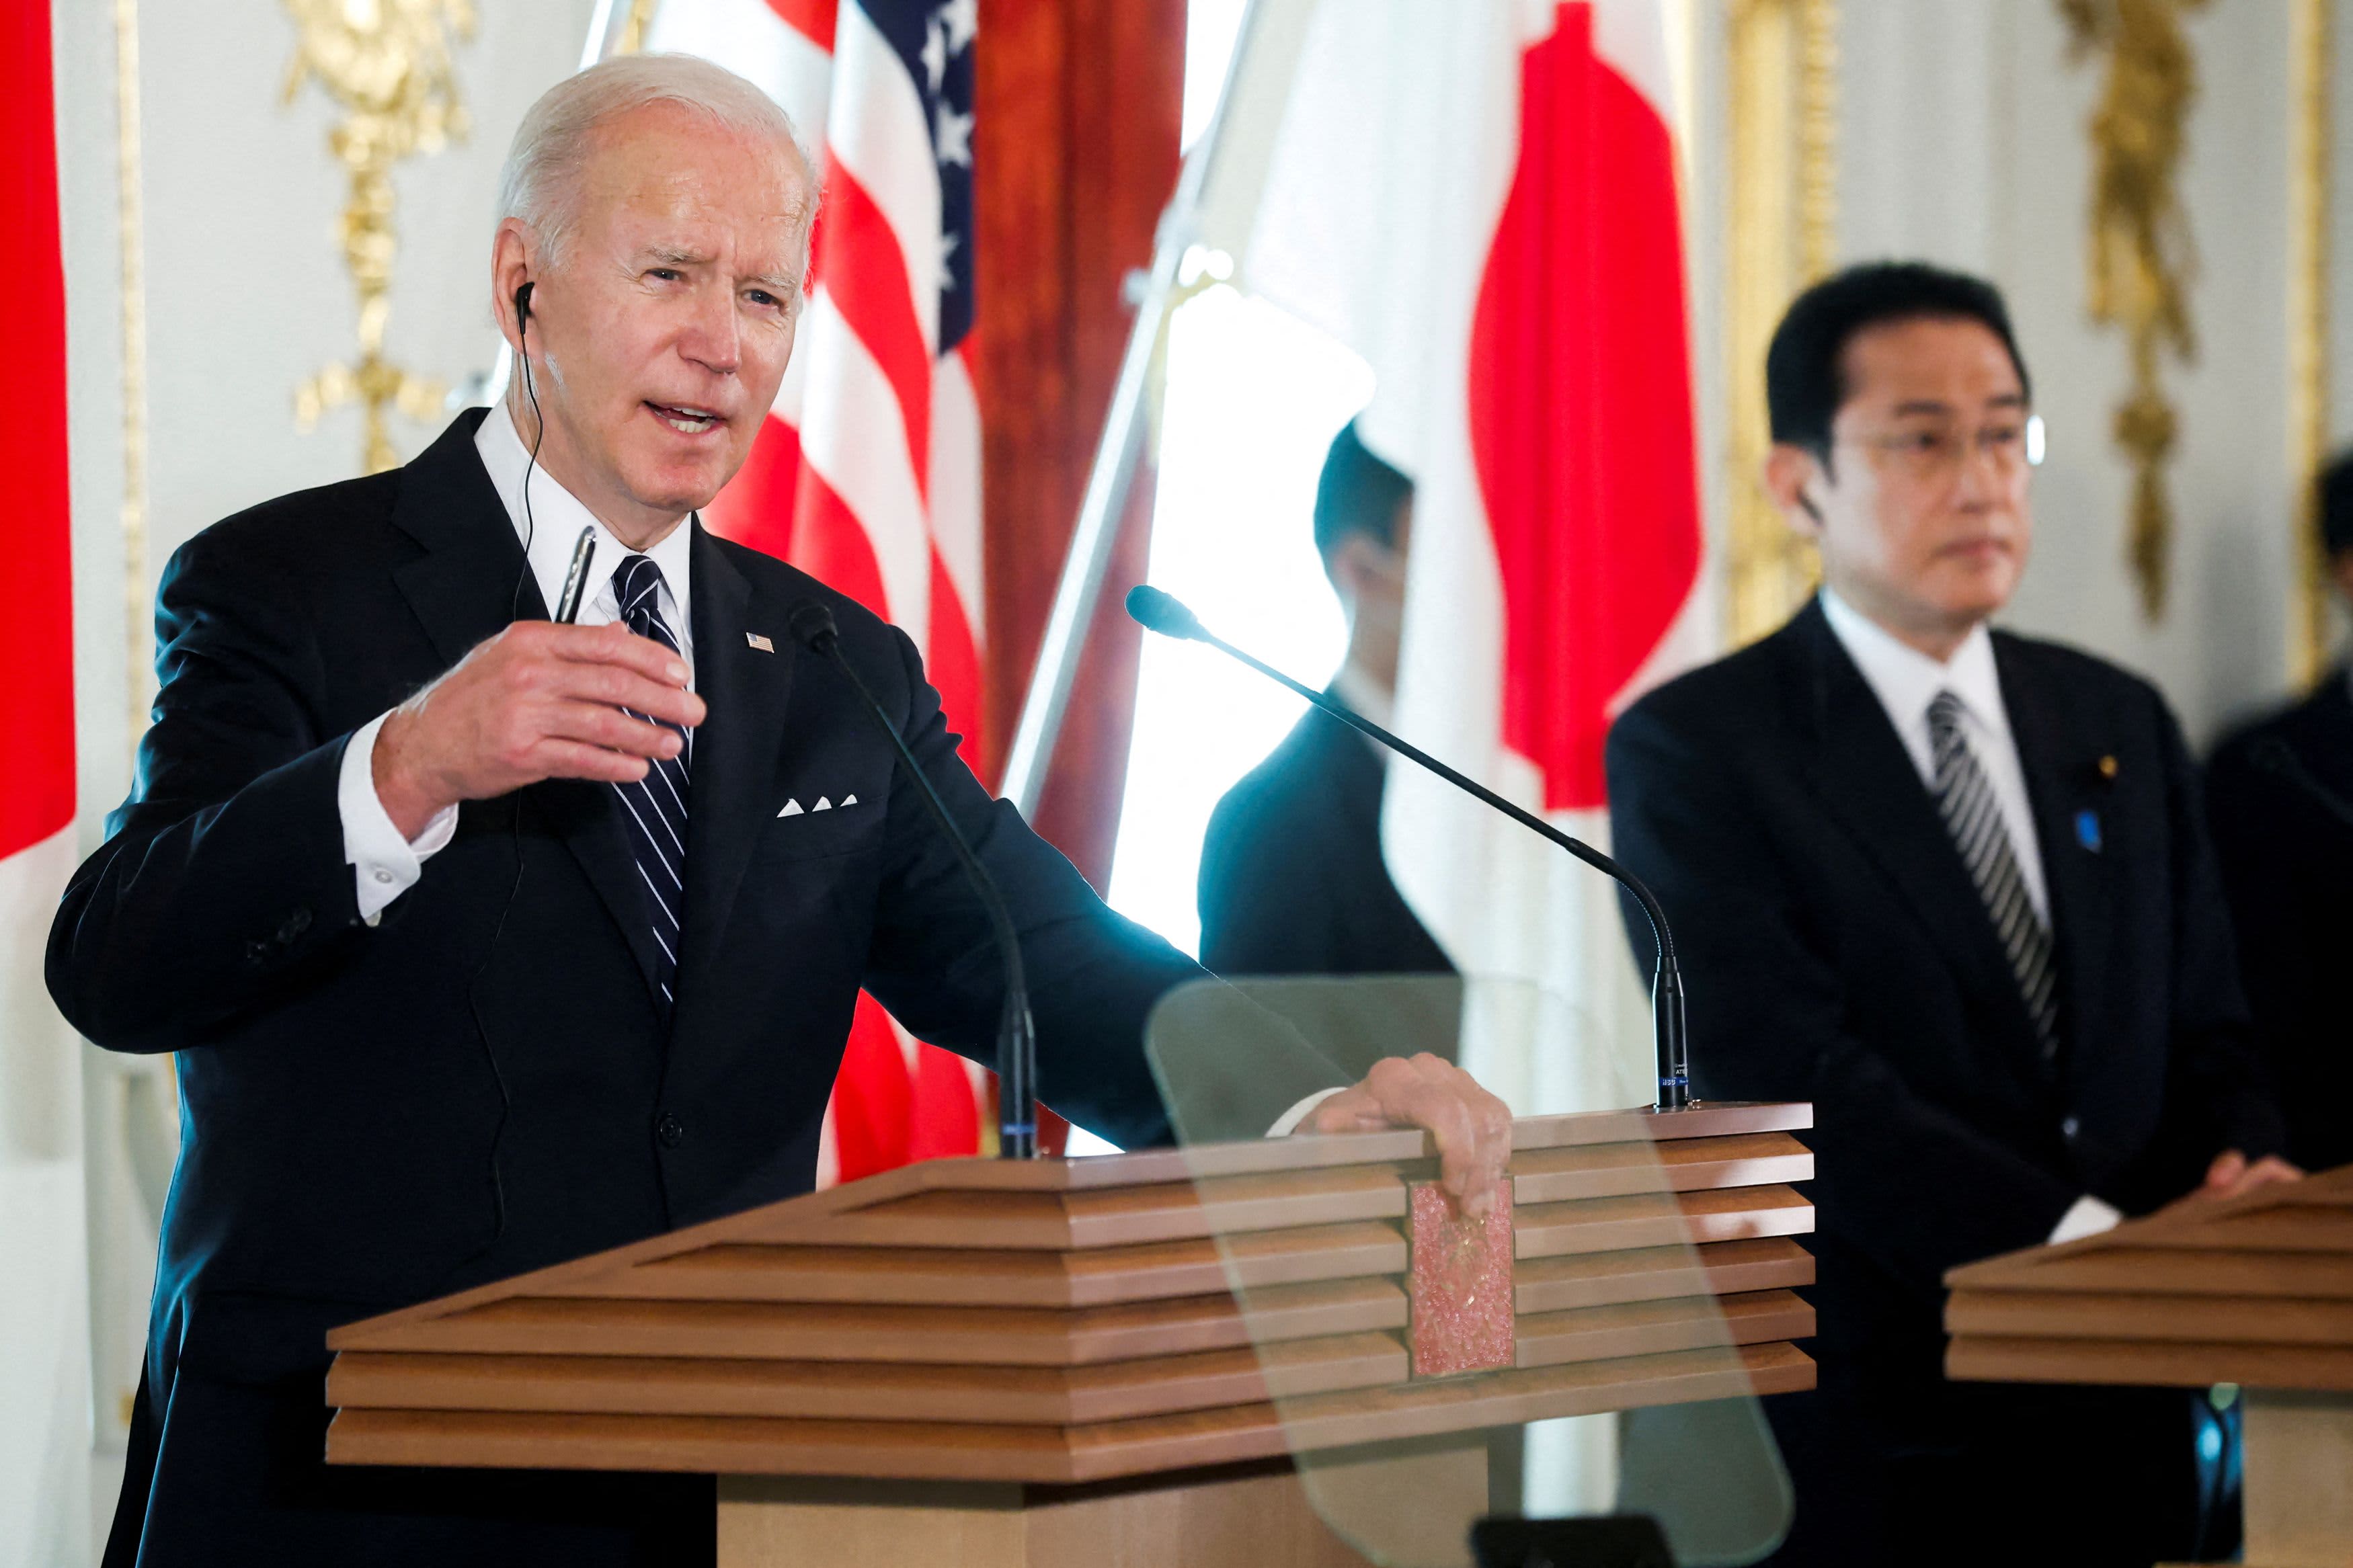 Biden says U.S forces would defend Taiwan in the event of Chinese invasion